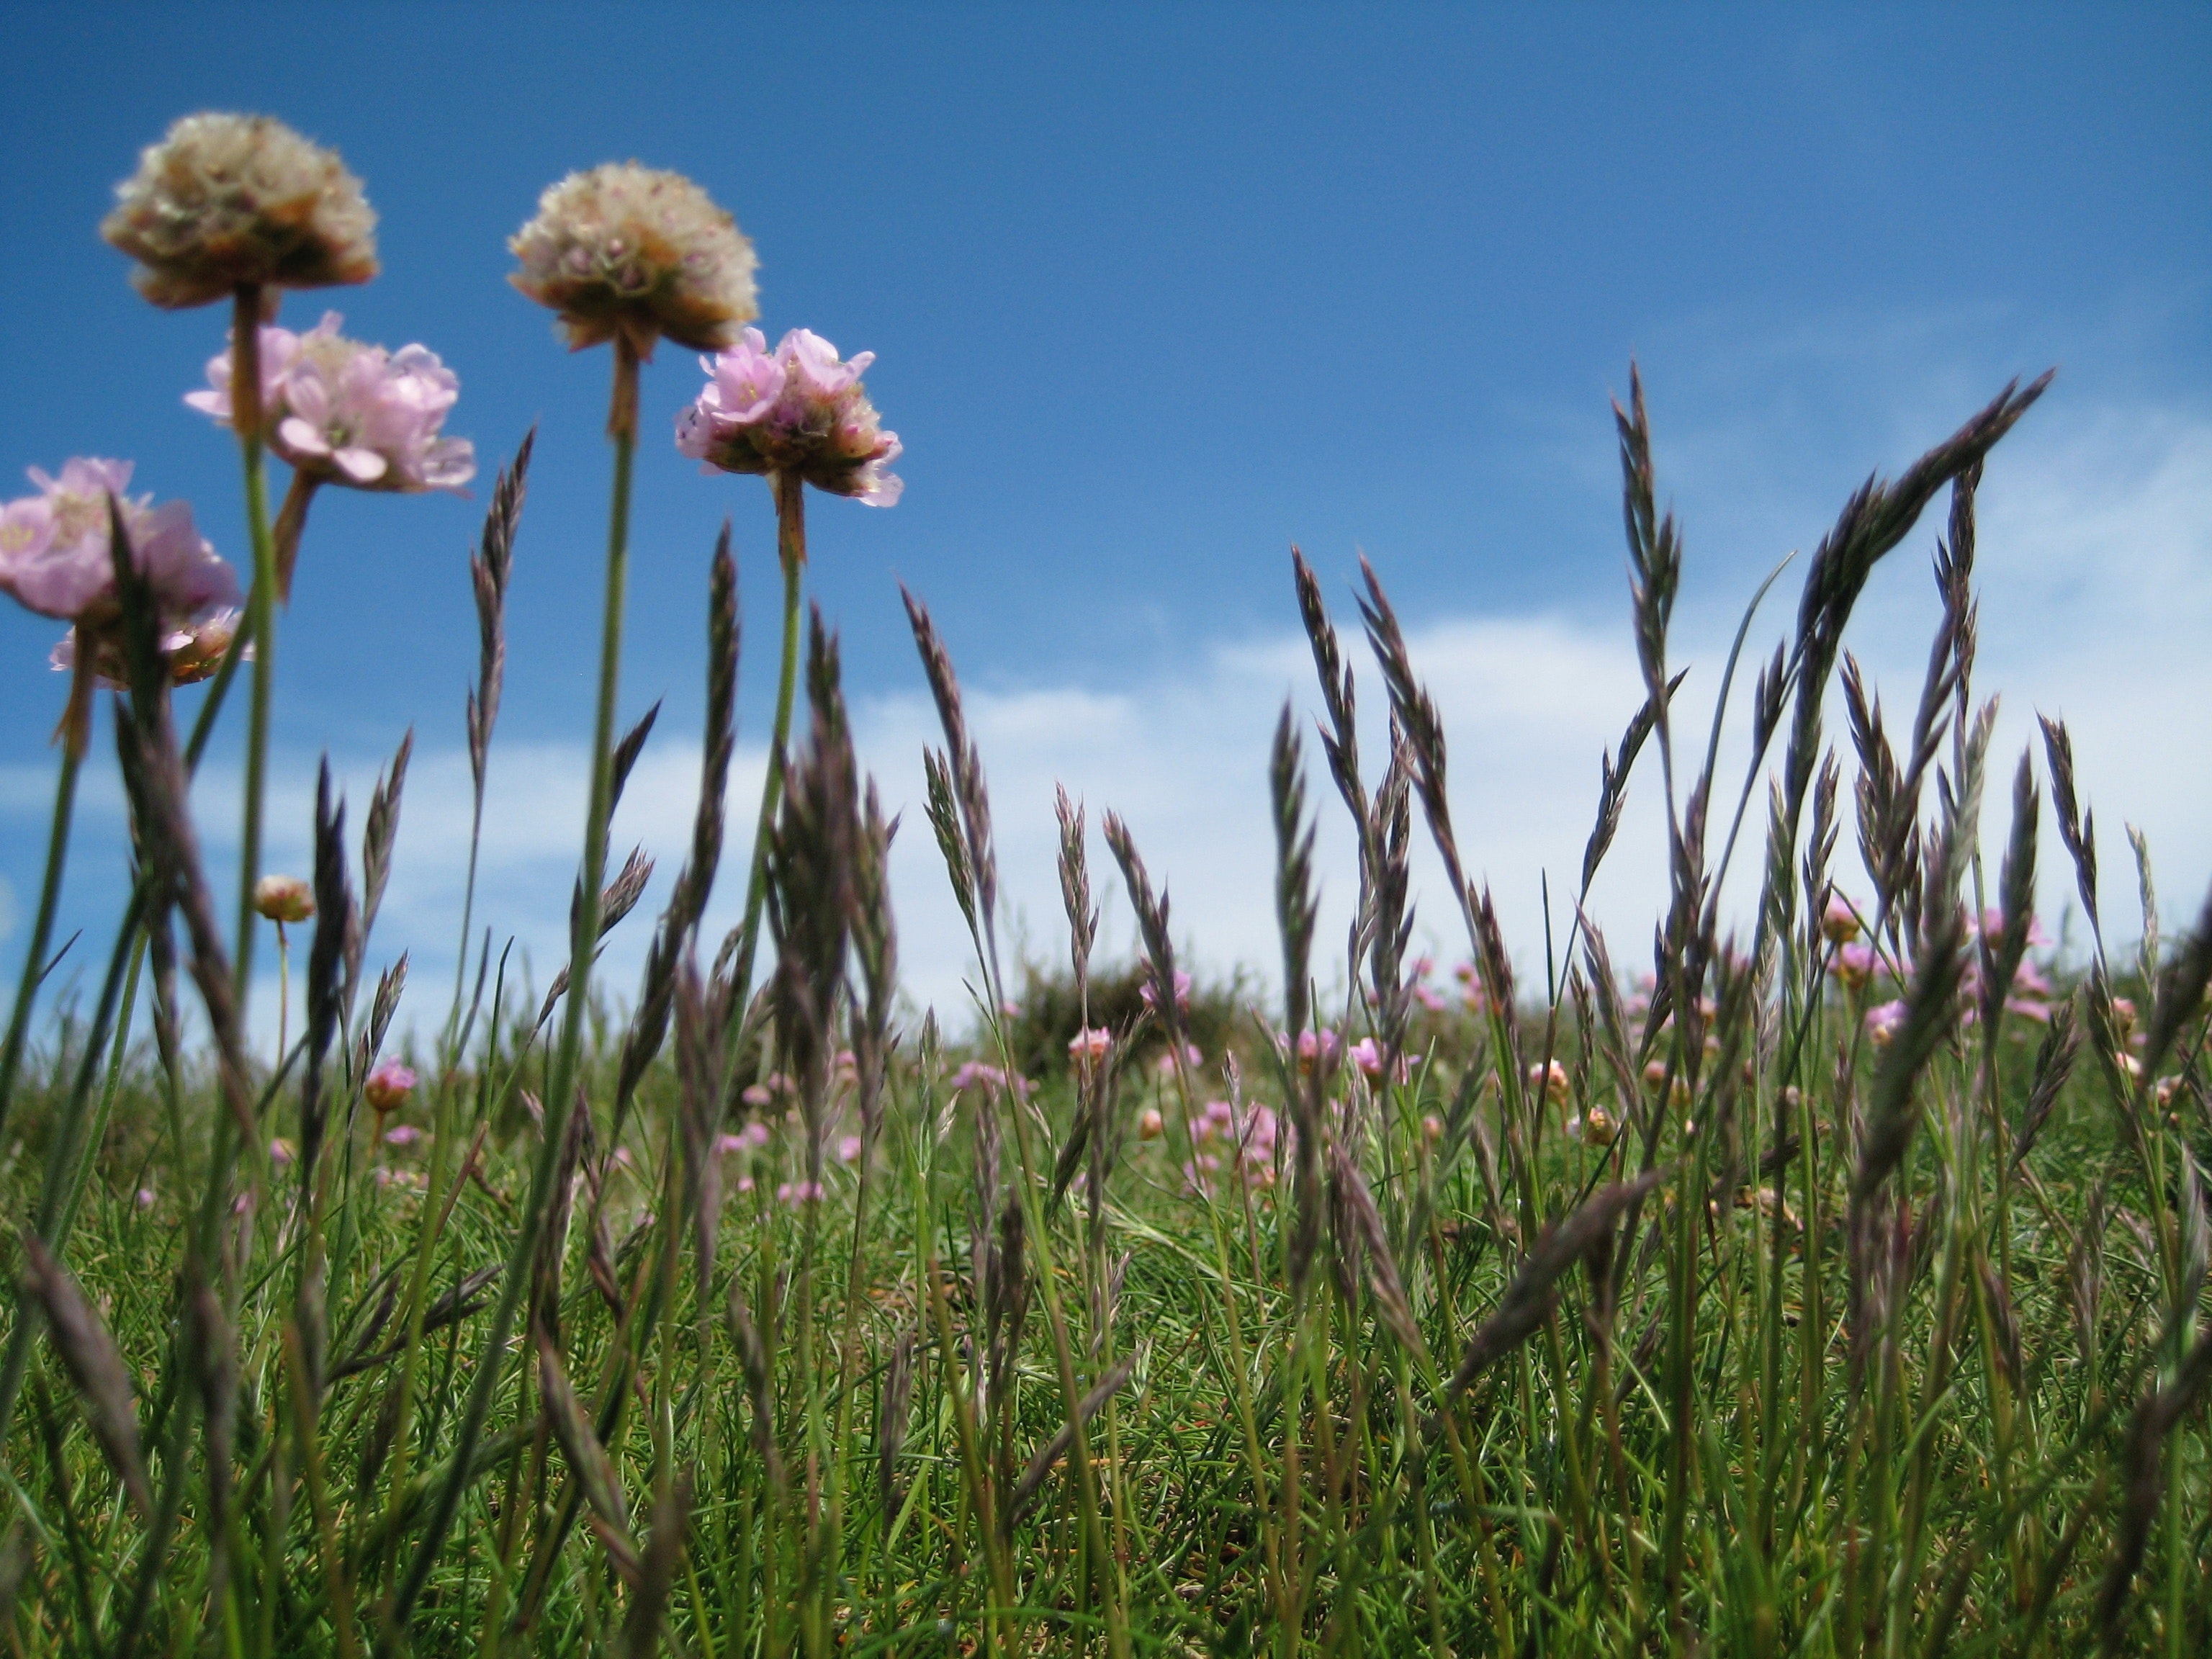 Pink flower on green field under white and blue sky during daytime photo